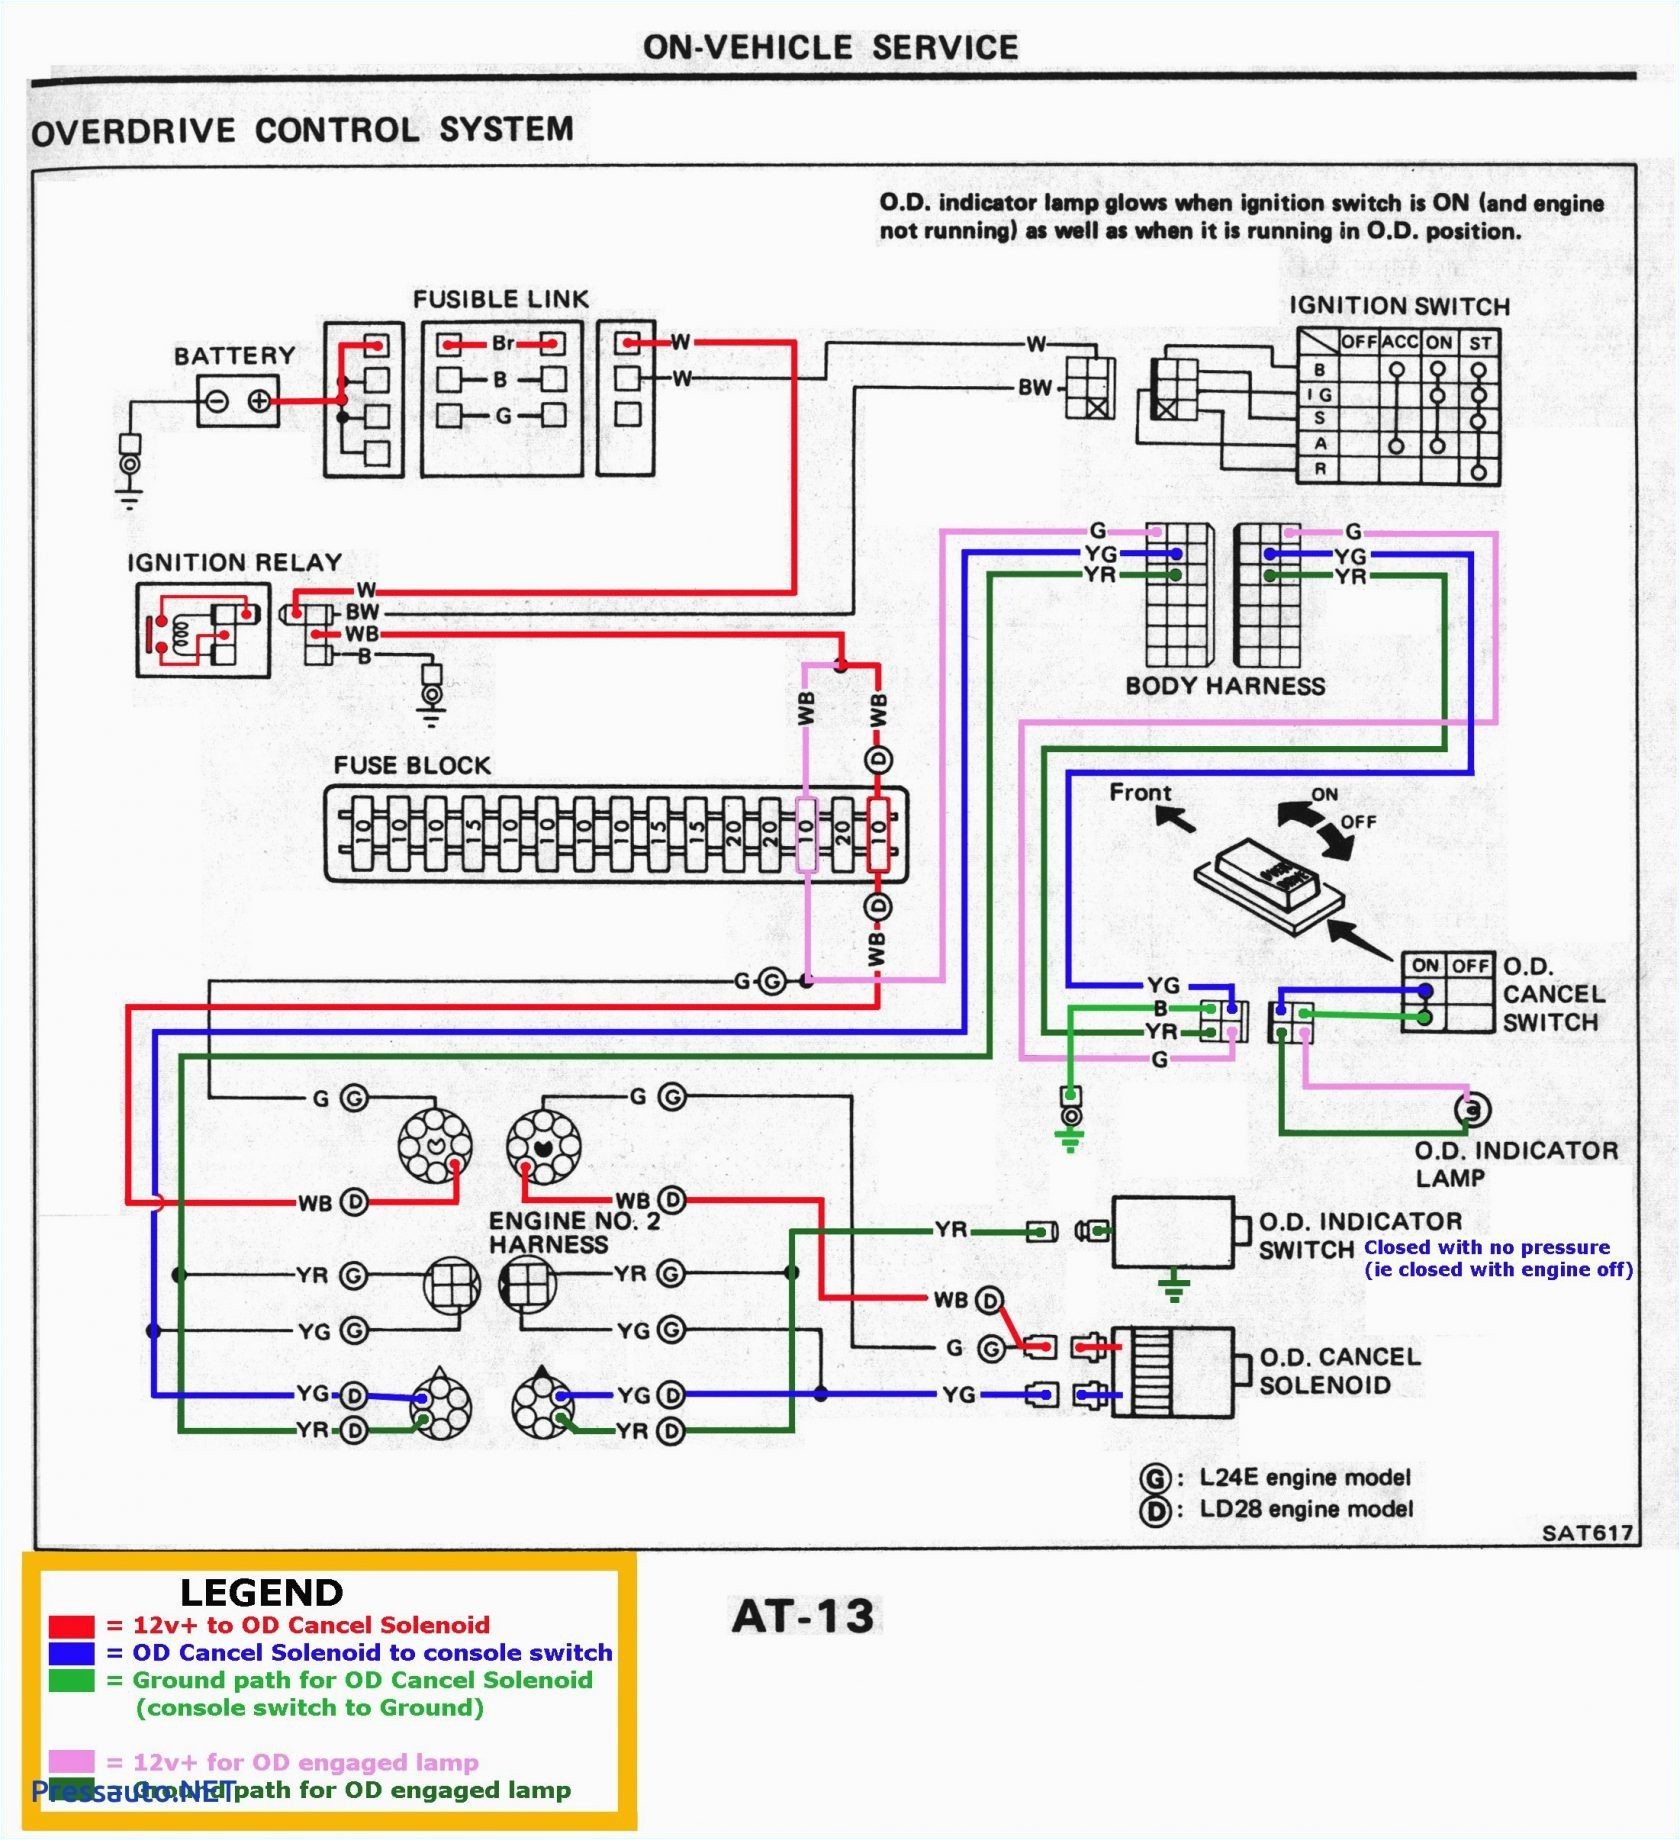 l255 wiring diagram wiring diagram options new holland l255 wiring diagram l255 wiring diagram